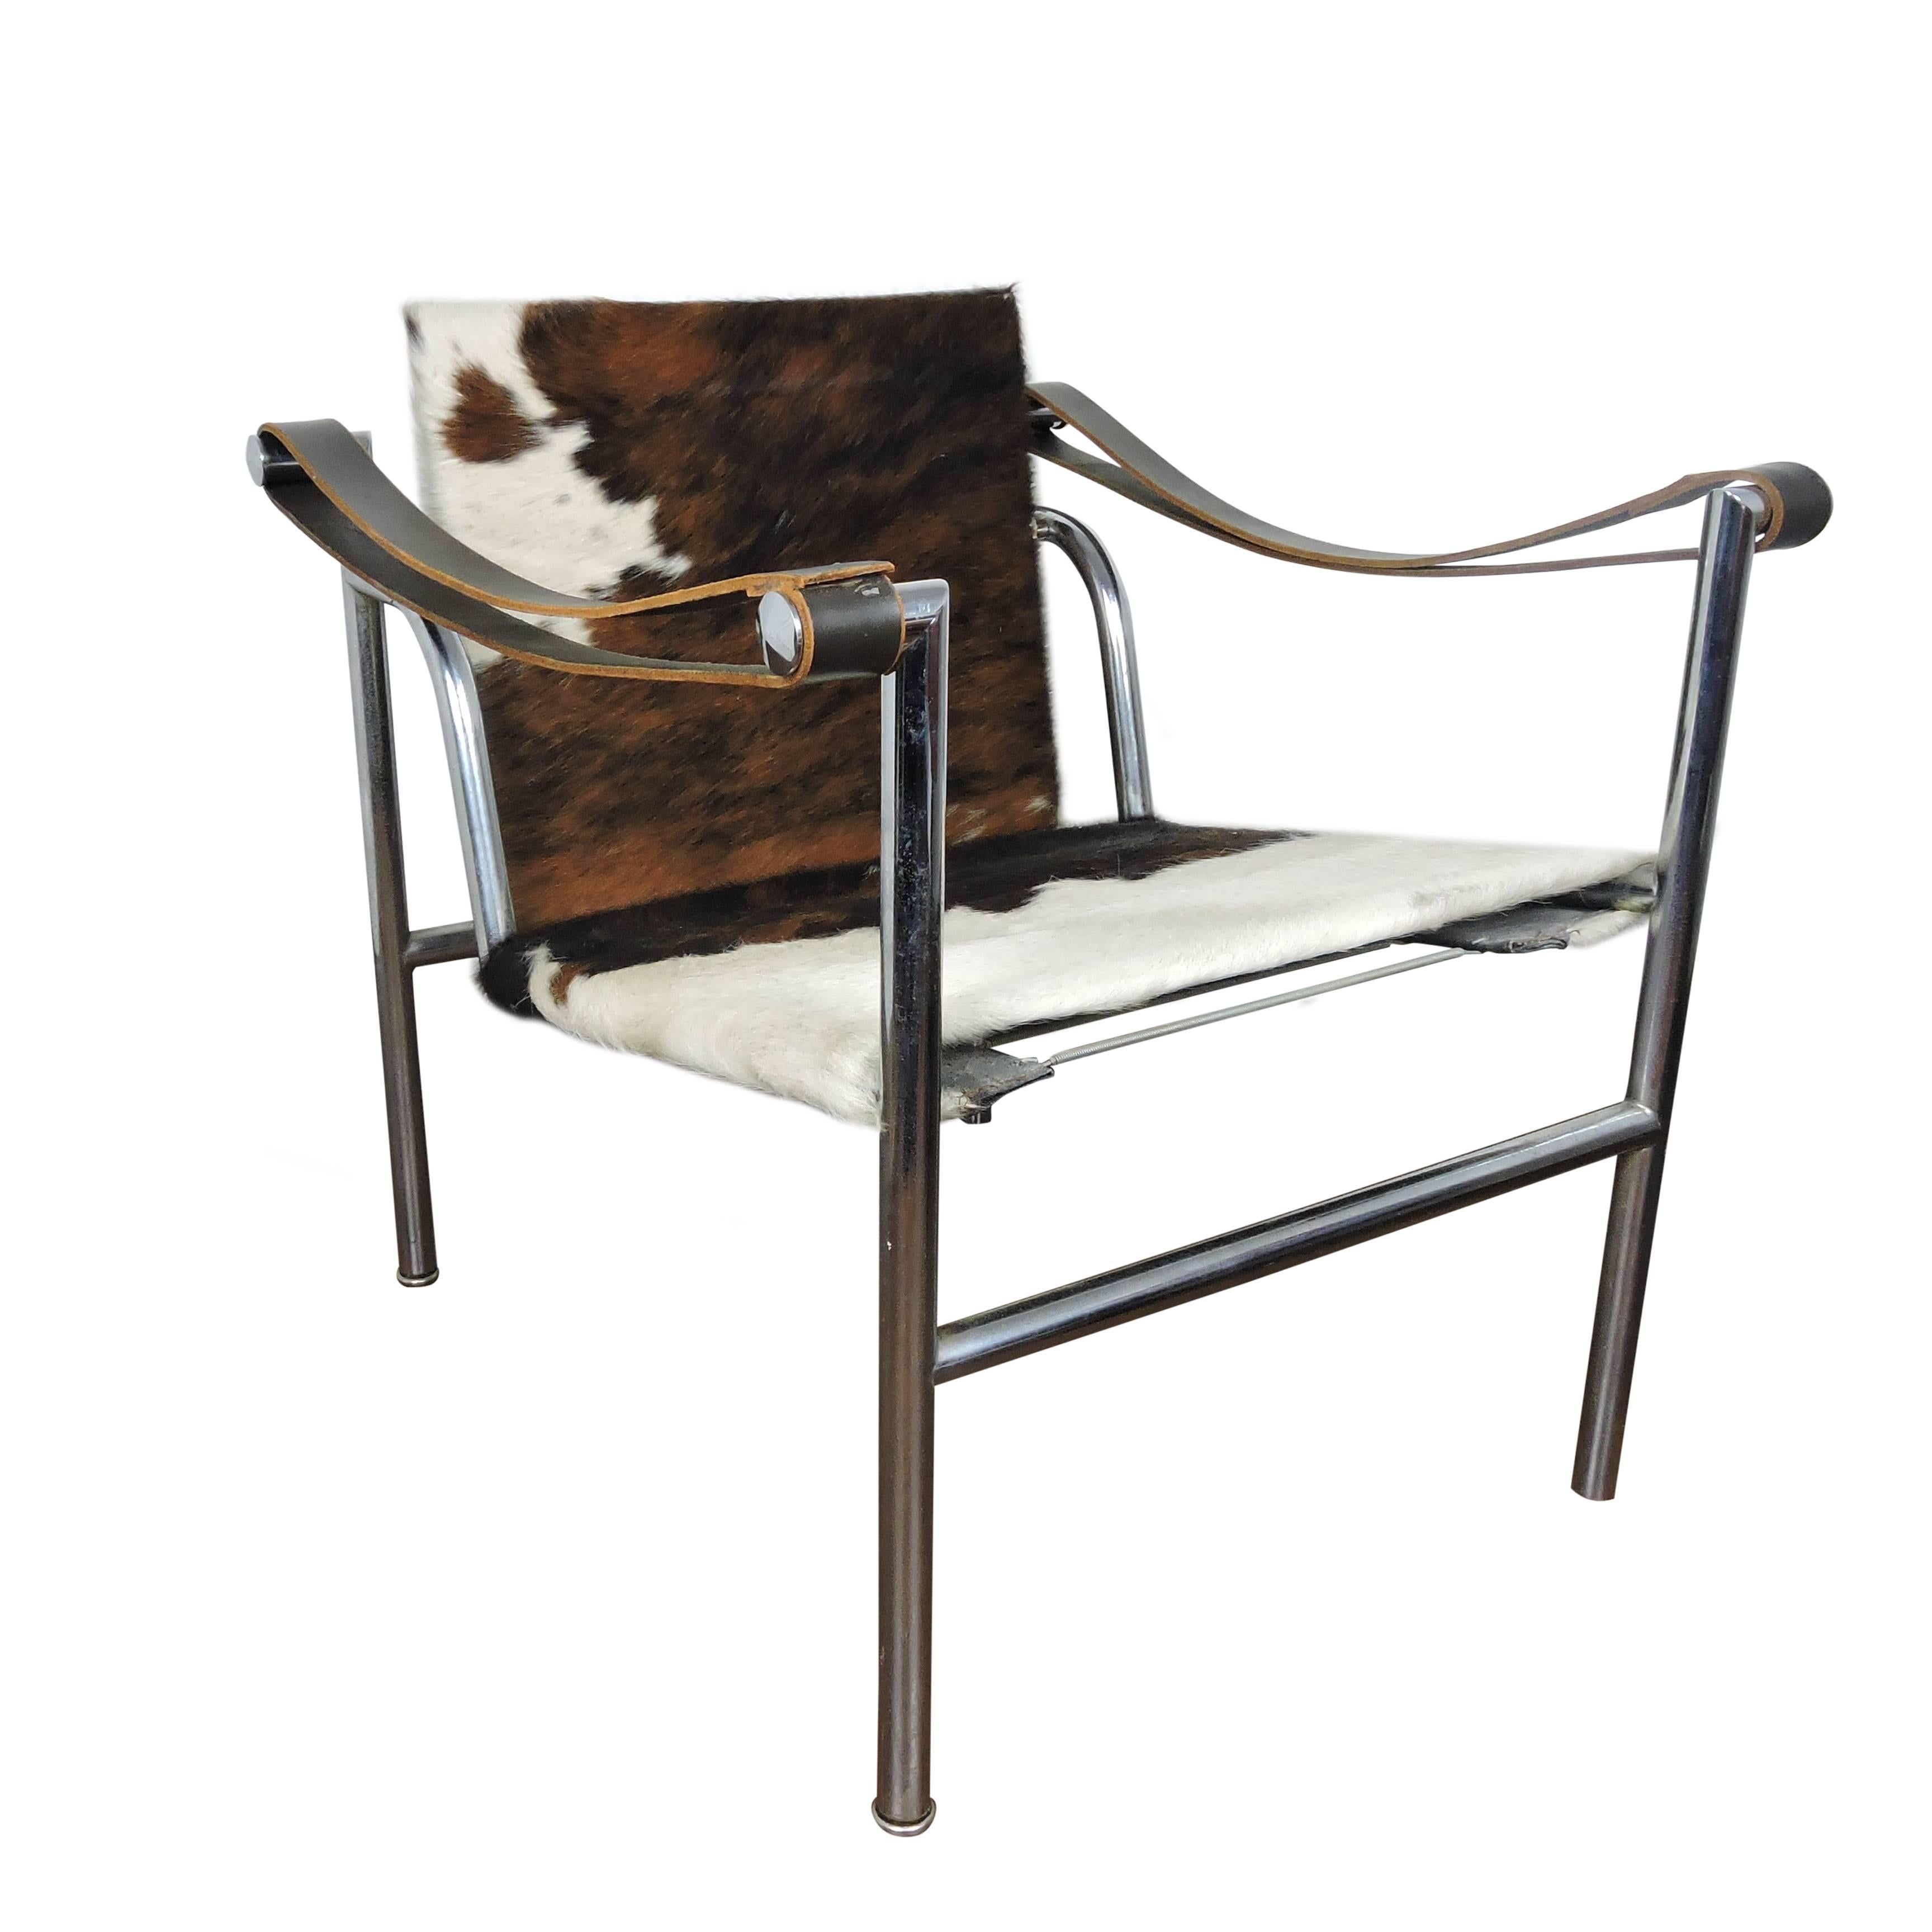 Italian Mid-Century Modern Le Corbusier cow-hide chair with chrome frame. Features leather arm rests and adjustable back. LC1 lounge chairs designed by Le Corbusier, Pierre Jeanneret & Charlotte Perriand and produced by Cassina. Signed no.